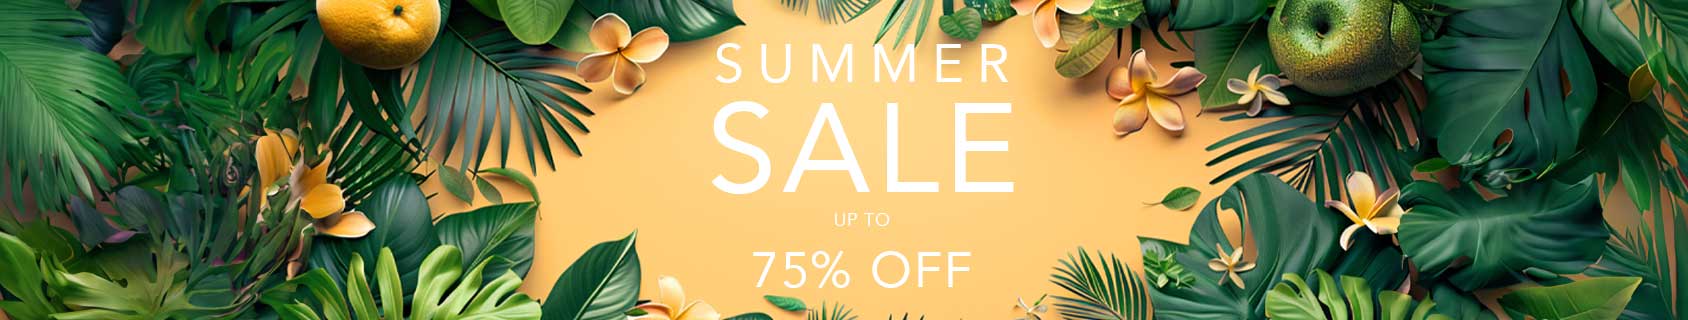 Summer Sale at Norton Barrie